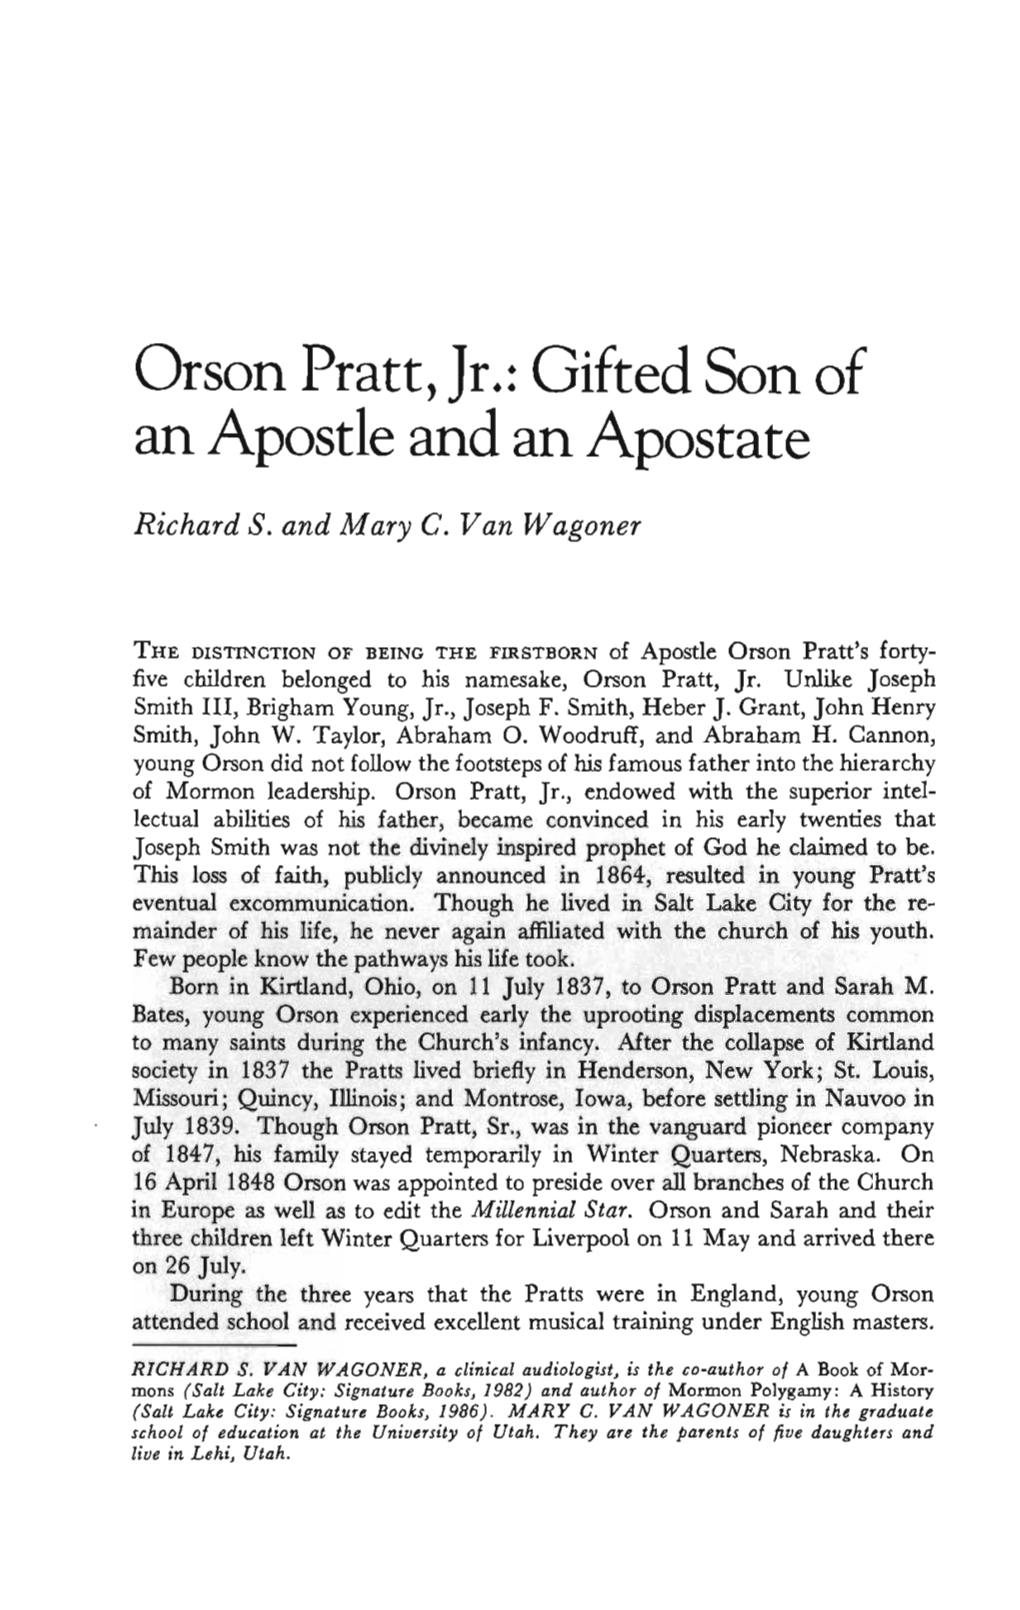 Orson Pratt, Jr.: Gifted Son of an Apostle and an Apostate